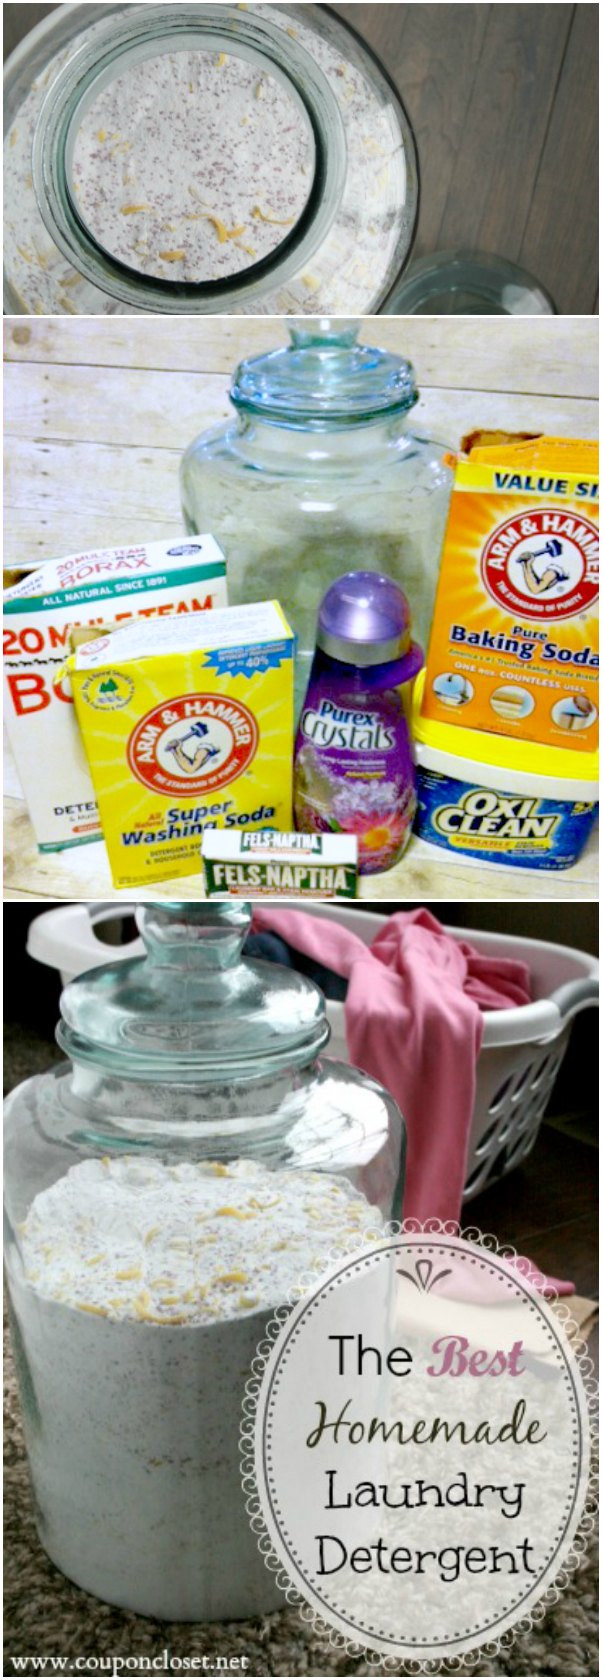 Diy Baby Laundry Detergent
 How to Make Homemade Laundry Detergent for HE Washers